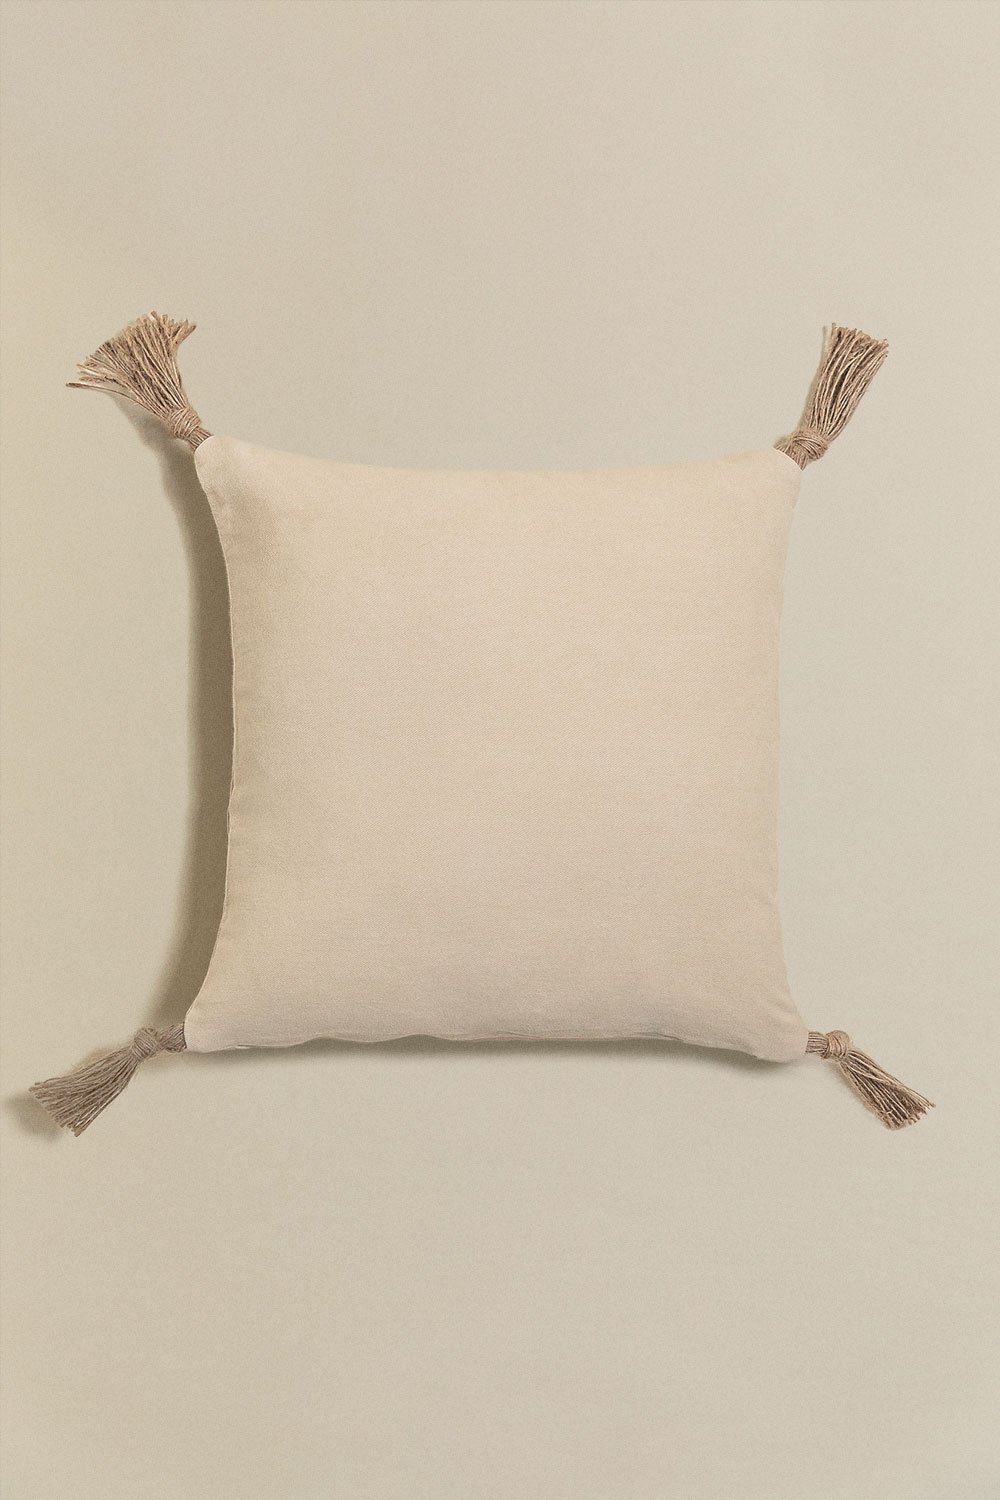 Square Cotton Cushion (45x45 cm) Musk, gallery image 1